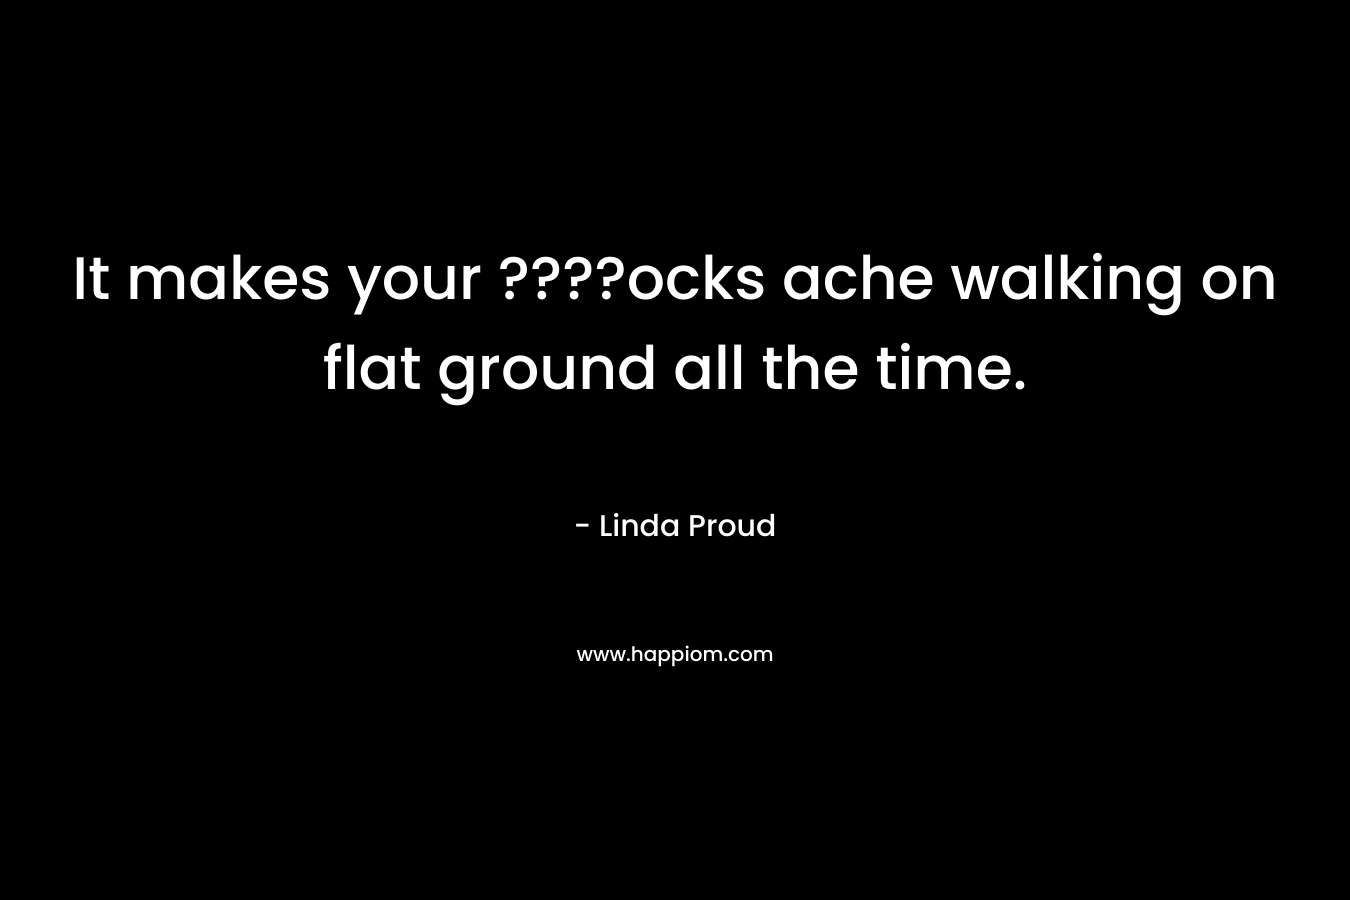 It makes your ????ocks ache walking on flat ground all the time.